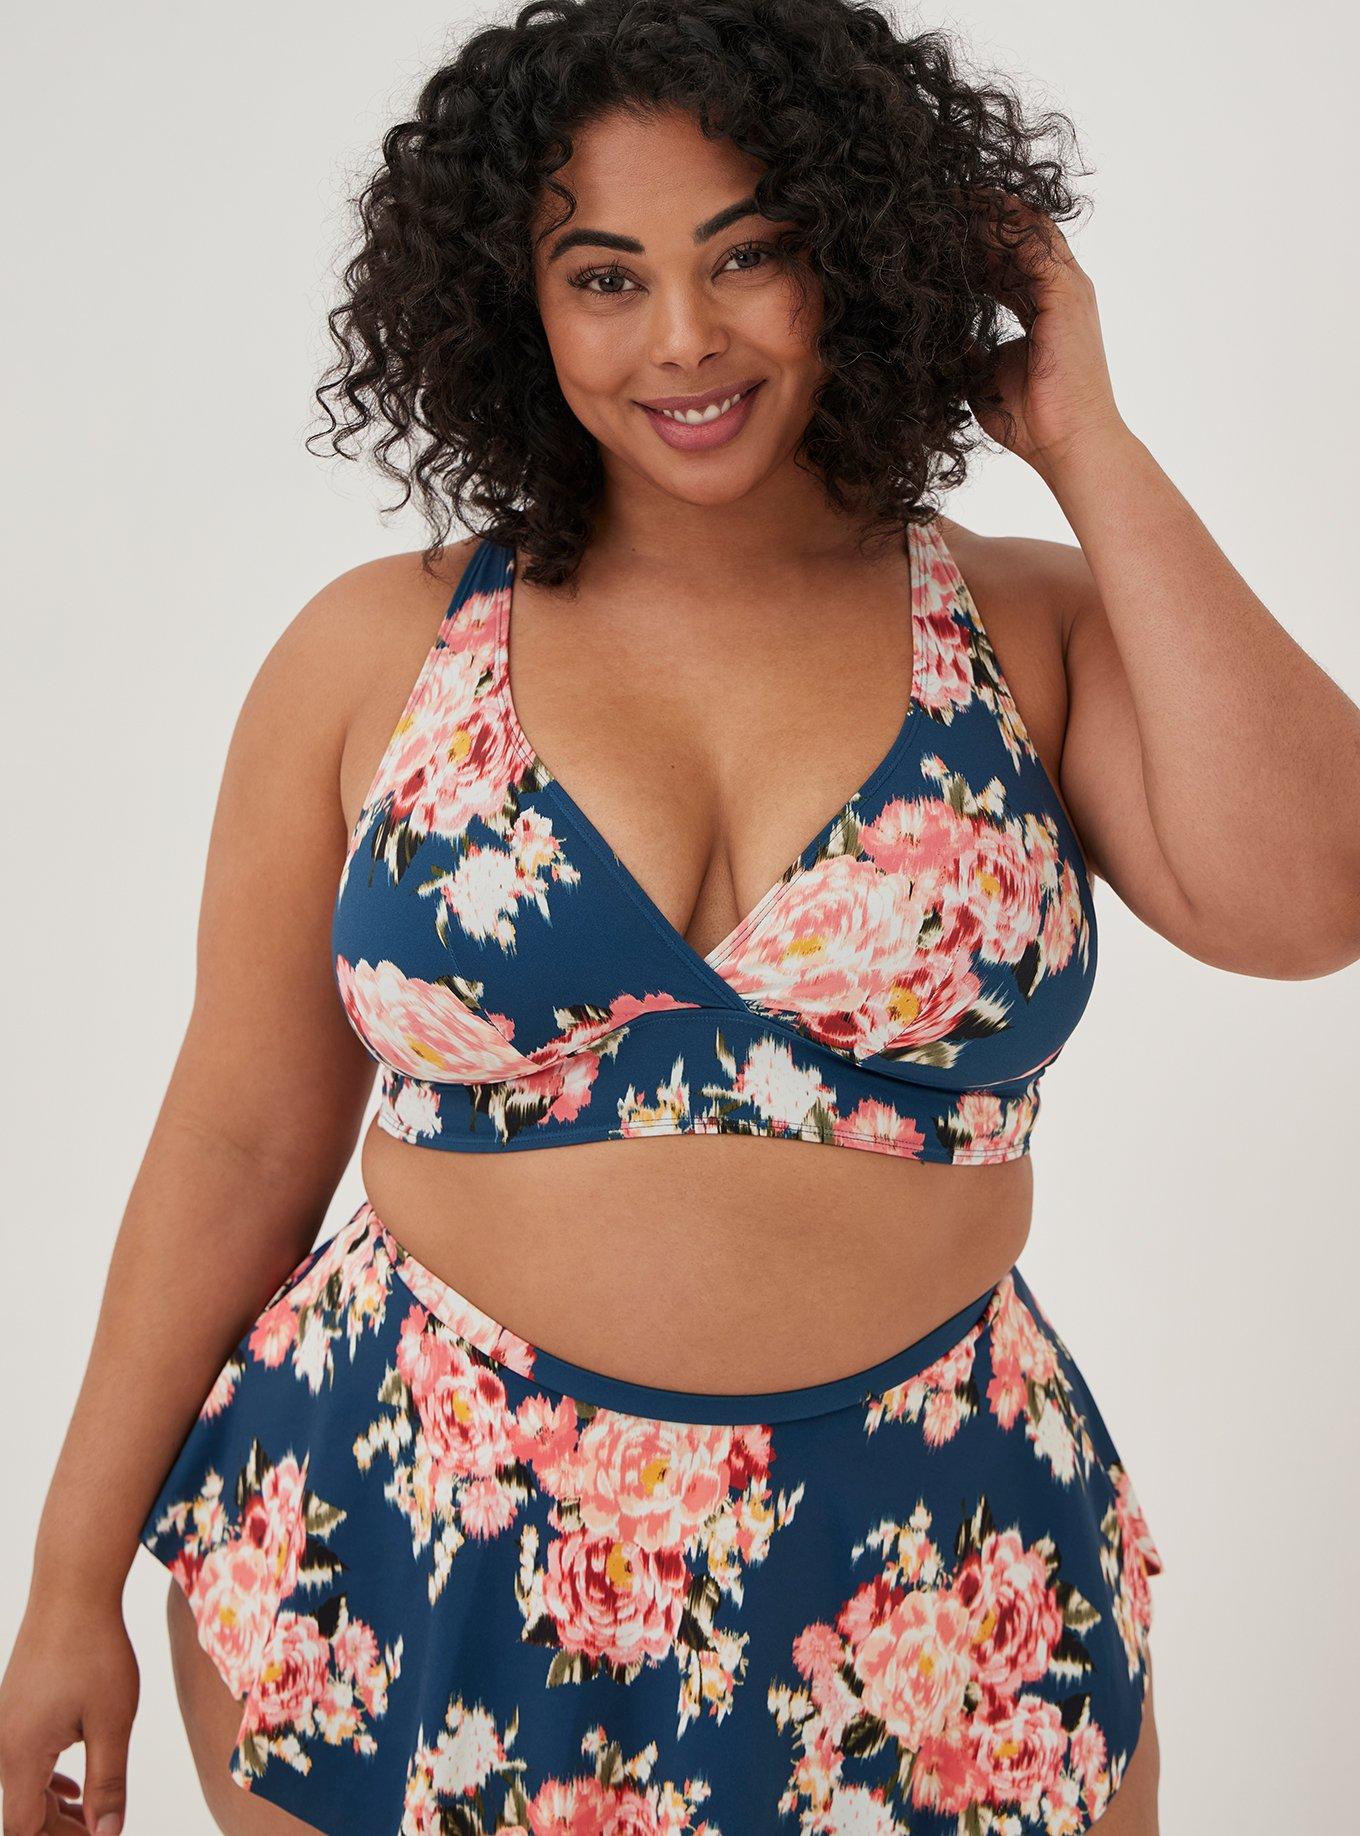 Torrid Plus Size Women's Clothing for sale in Evansville, Indiana